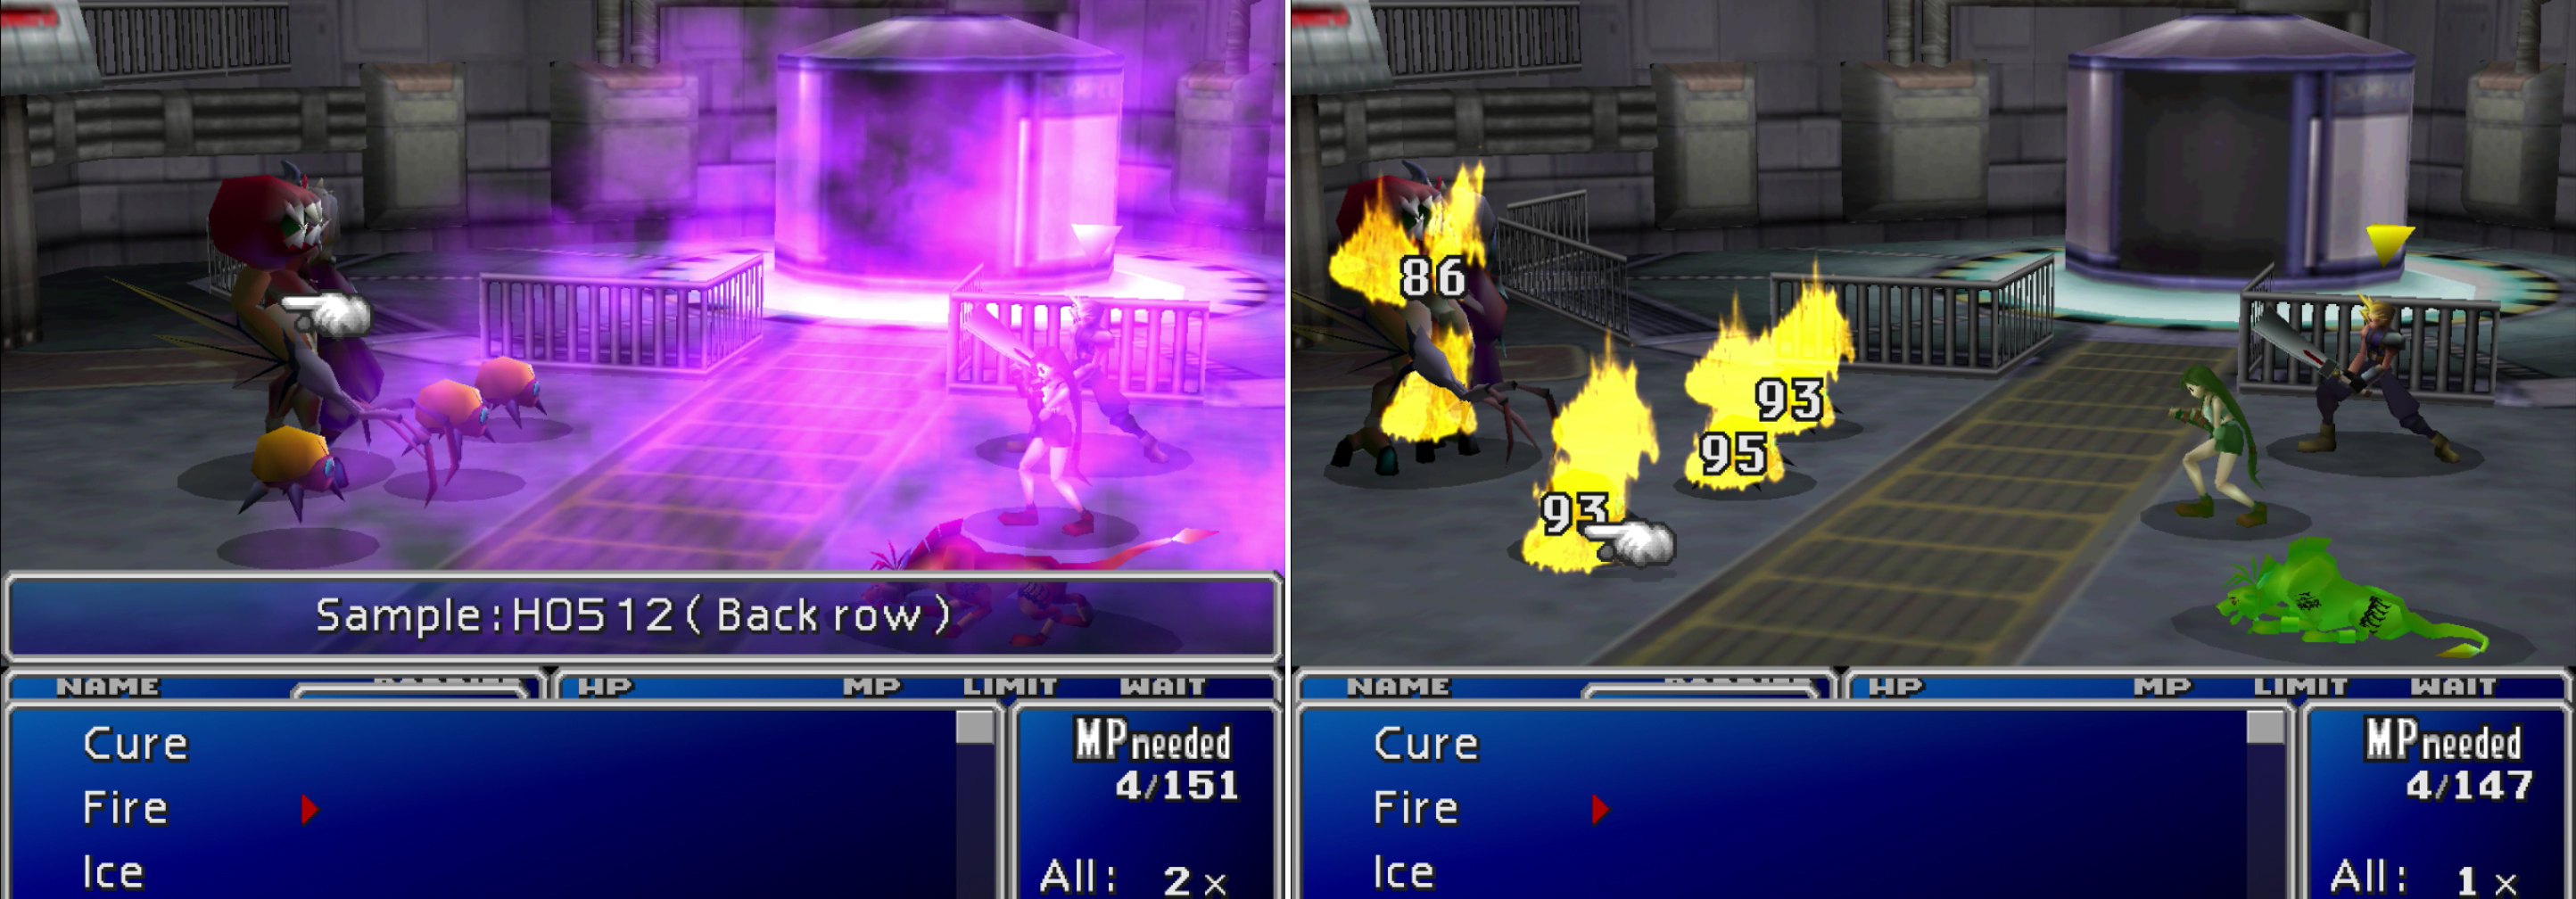 Sample HO512's "Shady Breath" attack can poison the entire party if they're not protect with a Star Pendant or Elemental Materia (left). Using magic to strike all your foes - or to harm Sample HO512 while bypassing its undelrings - is a good idea (right).